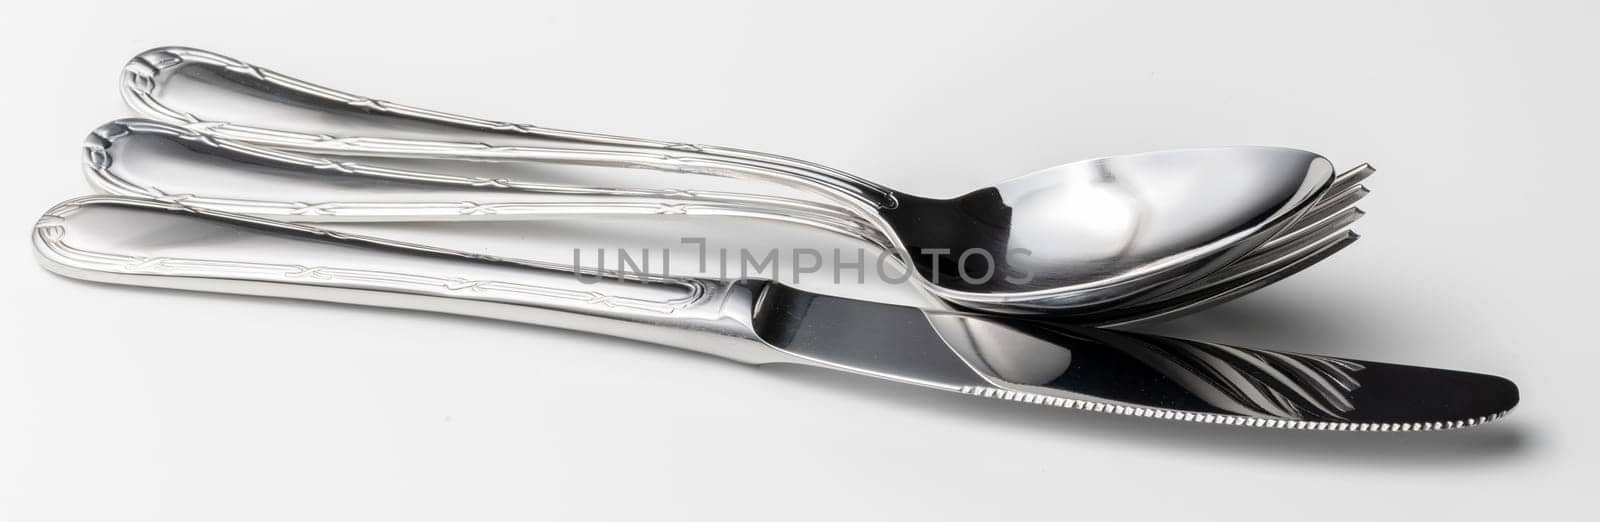 Spoon, fork and knife on a white background. High quality photo